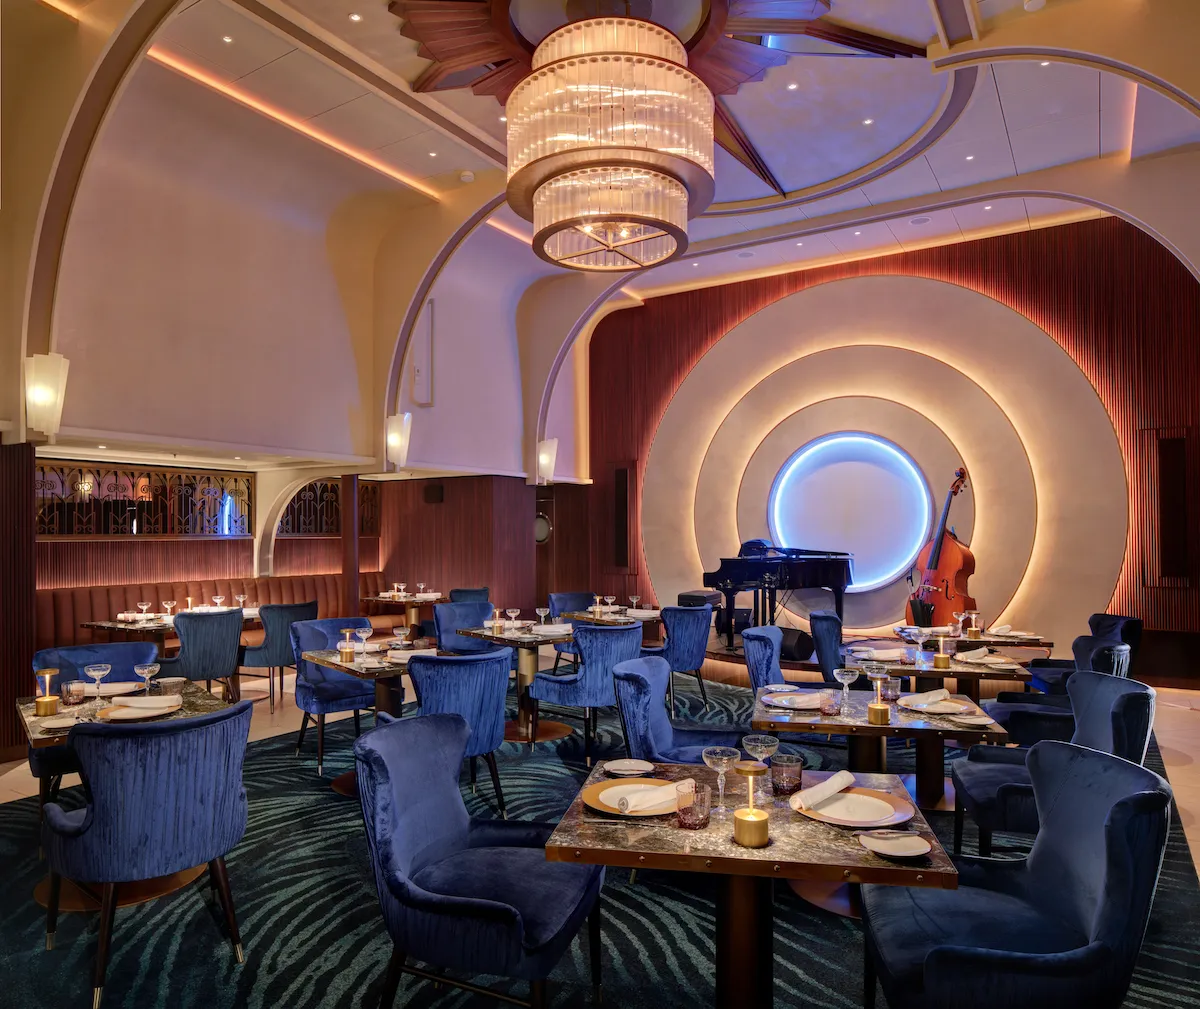 the exclusive club in Royal Caribbean's newest cruise ship.